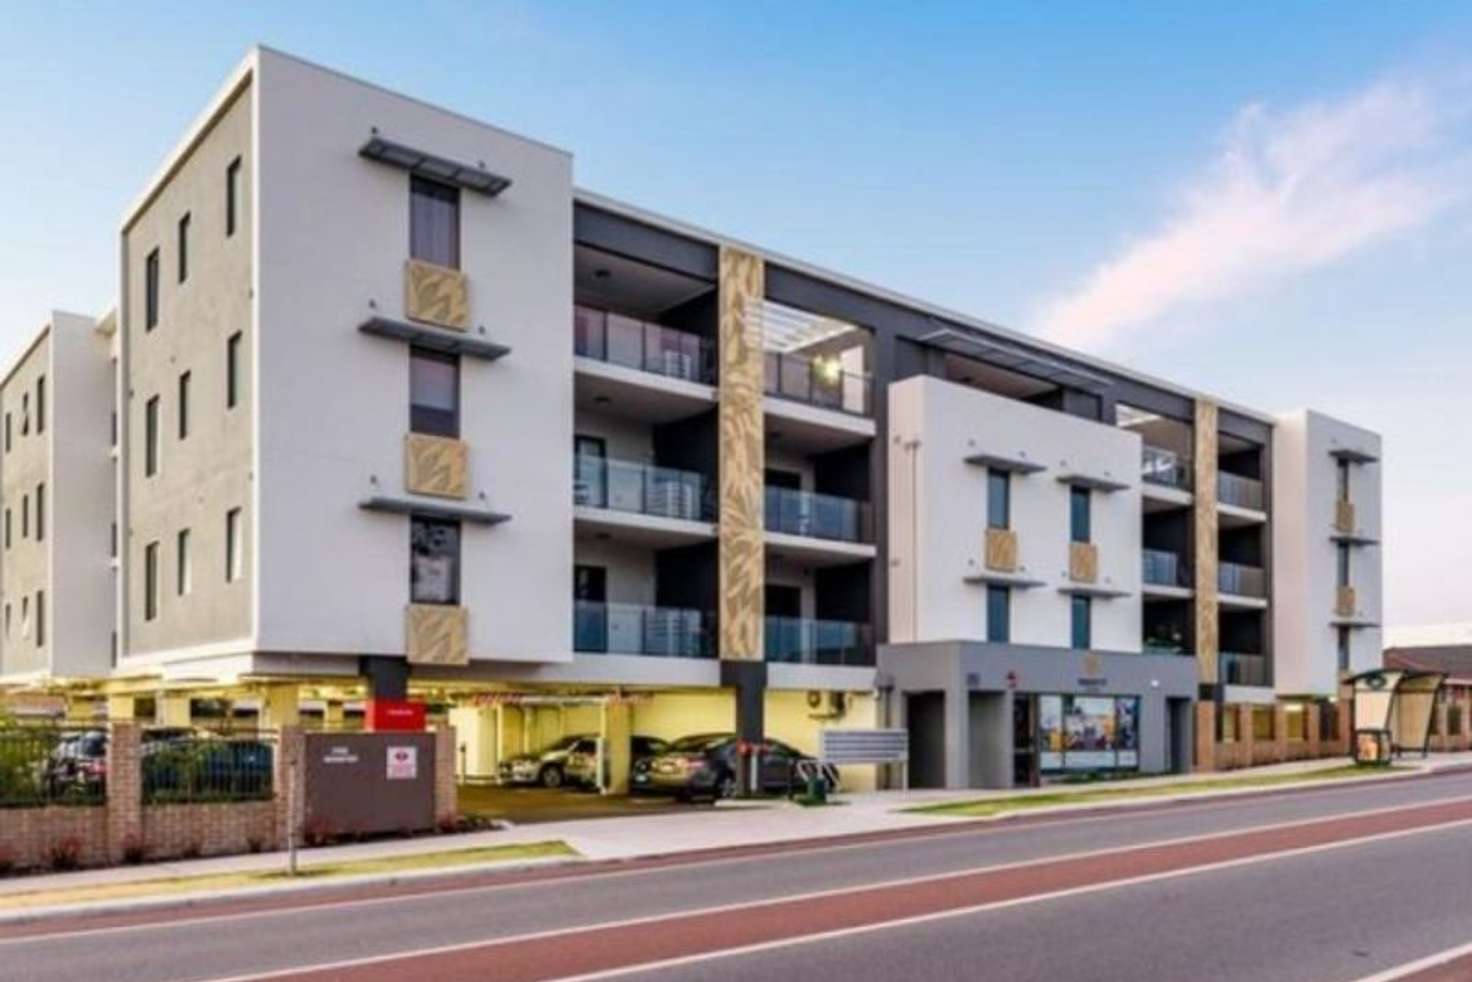 Main view of Homely apartment listing, 16/181 Wright Street, Kewdale WA 6105